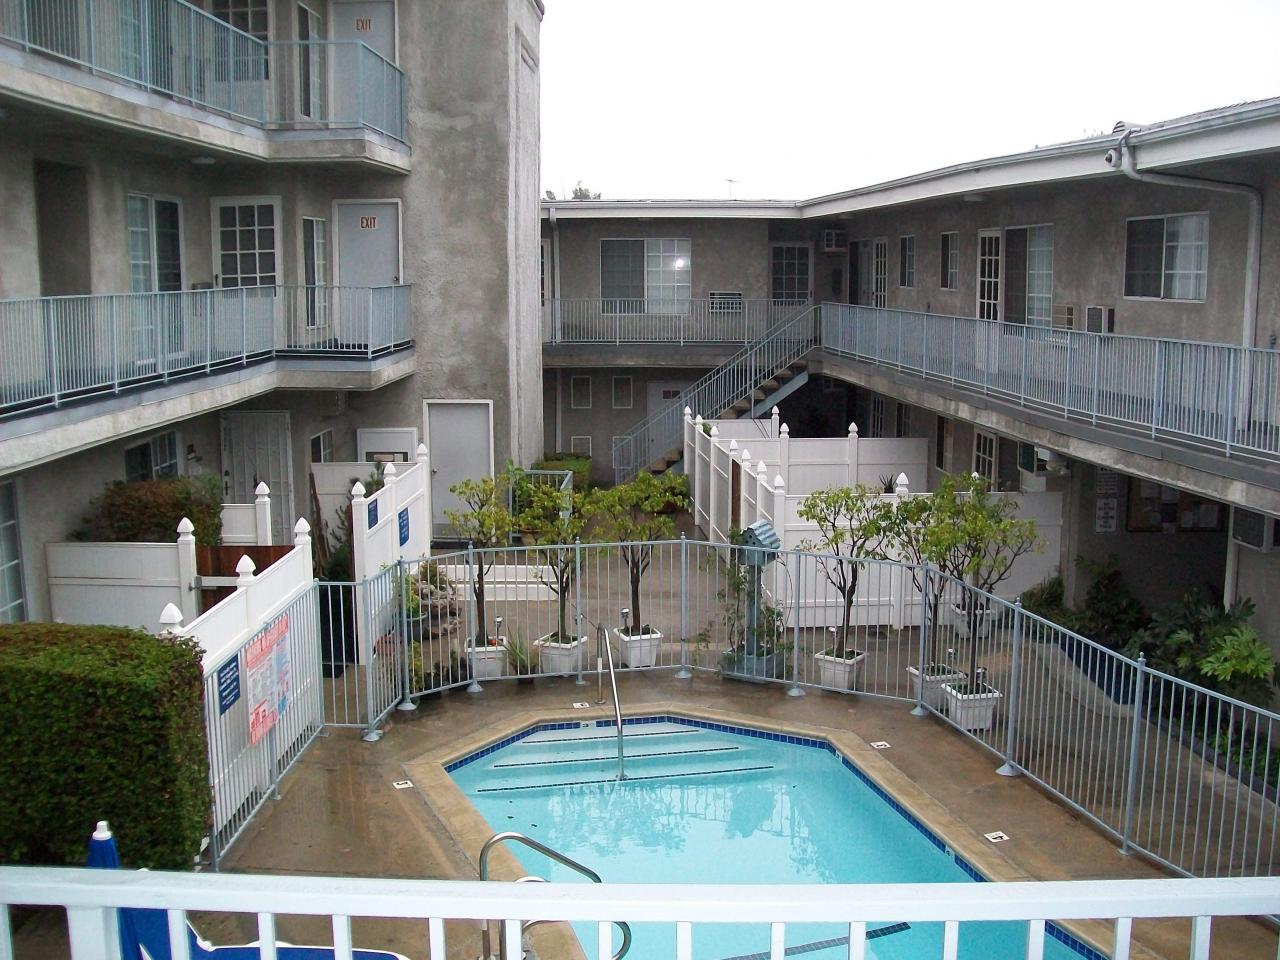 Photo of Kingsbury Villas Apartments - overview of building courtyard